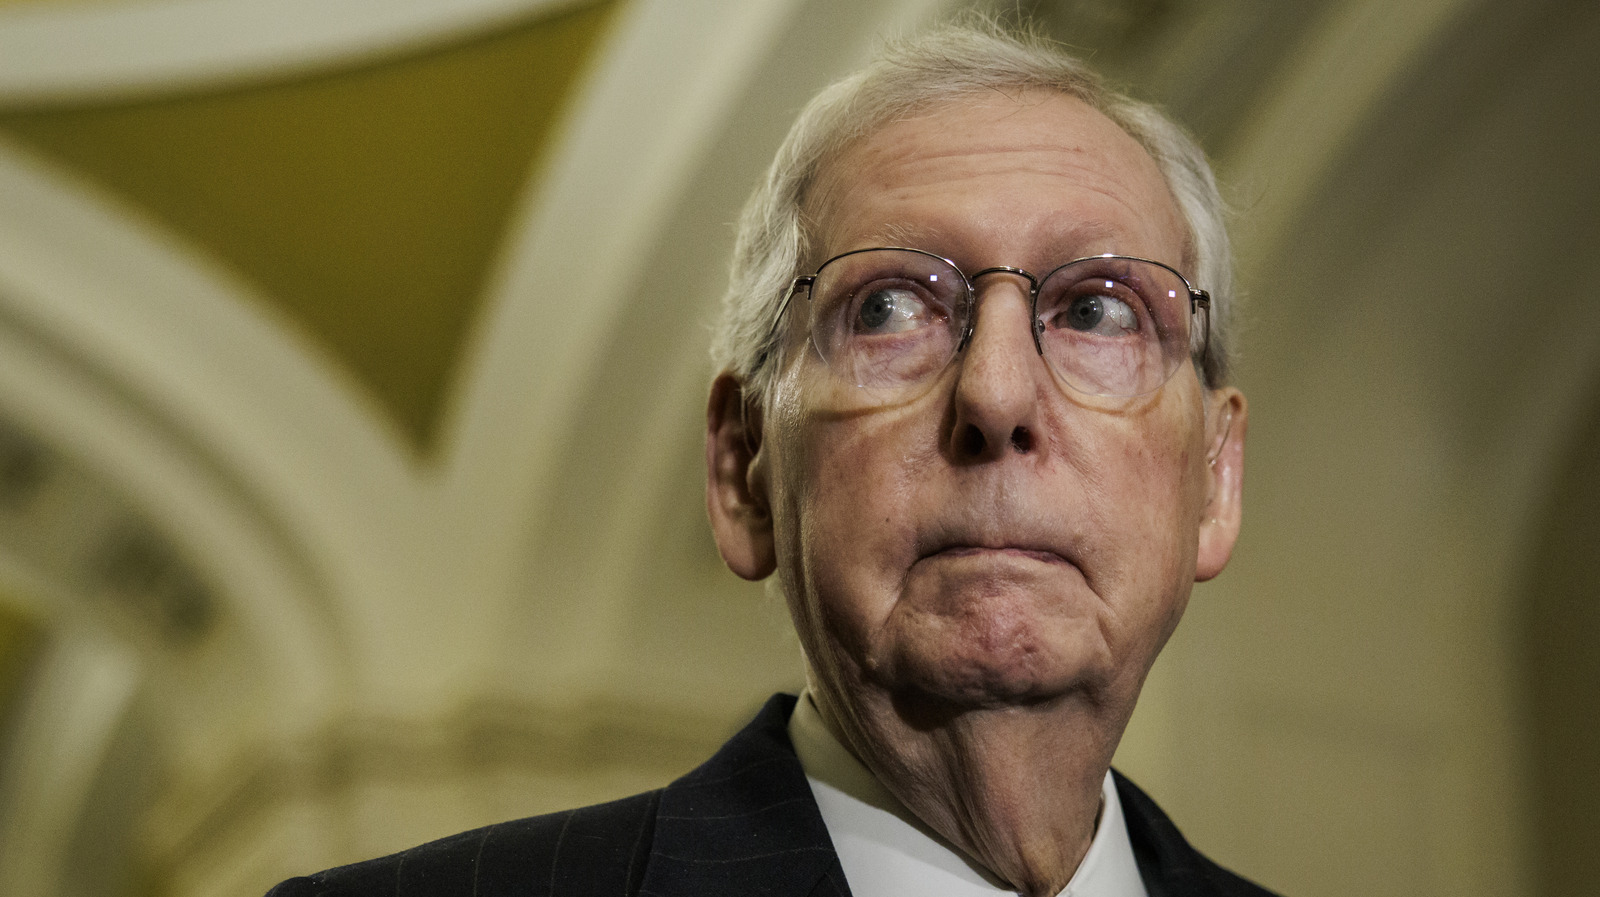 The Tragedy That Changed Mitch McConnell's Family Forever